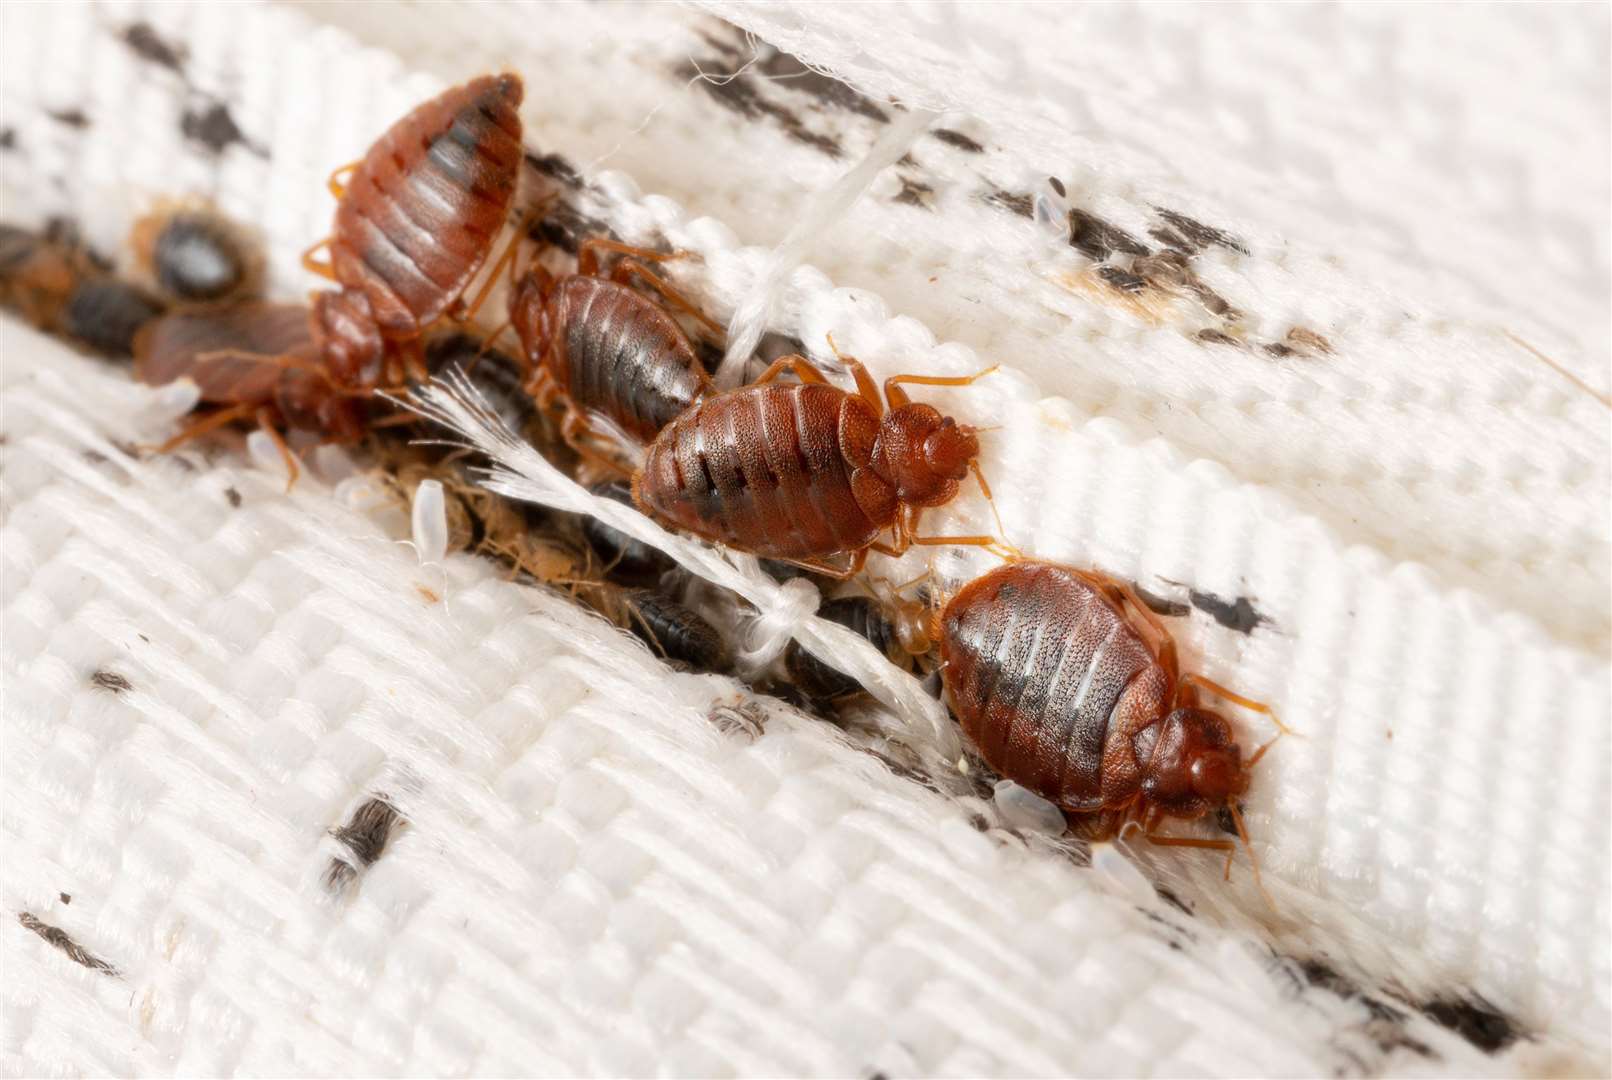 Bedbugs tend to live in fabric such as matresses or furniture. Image: iStock.